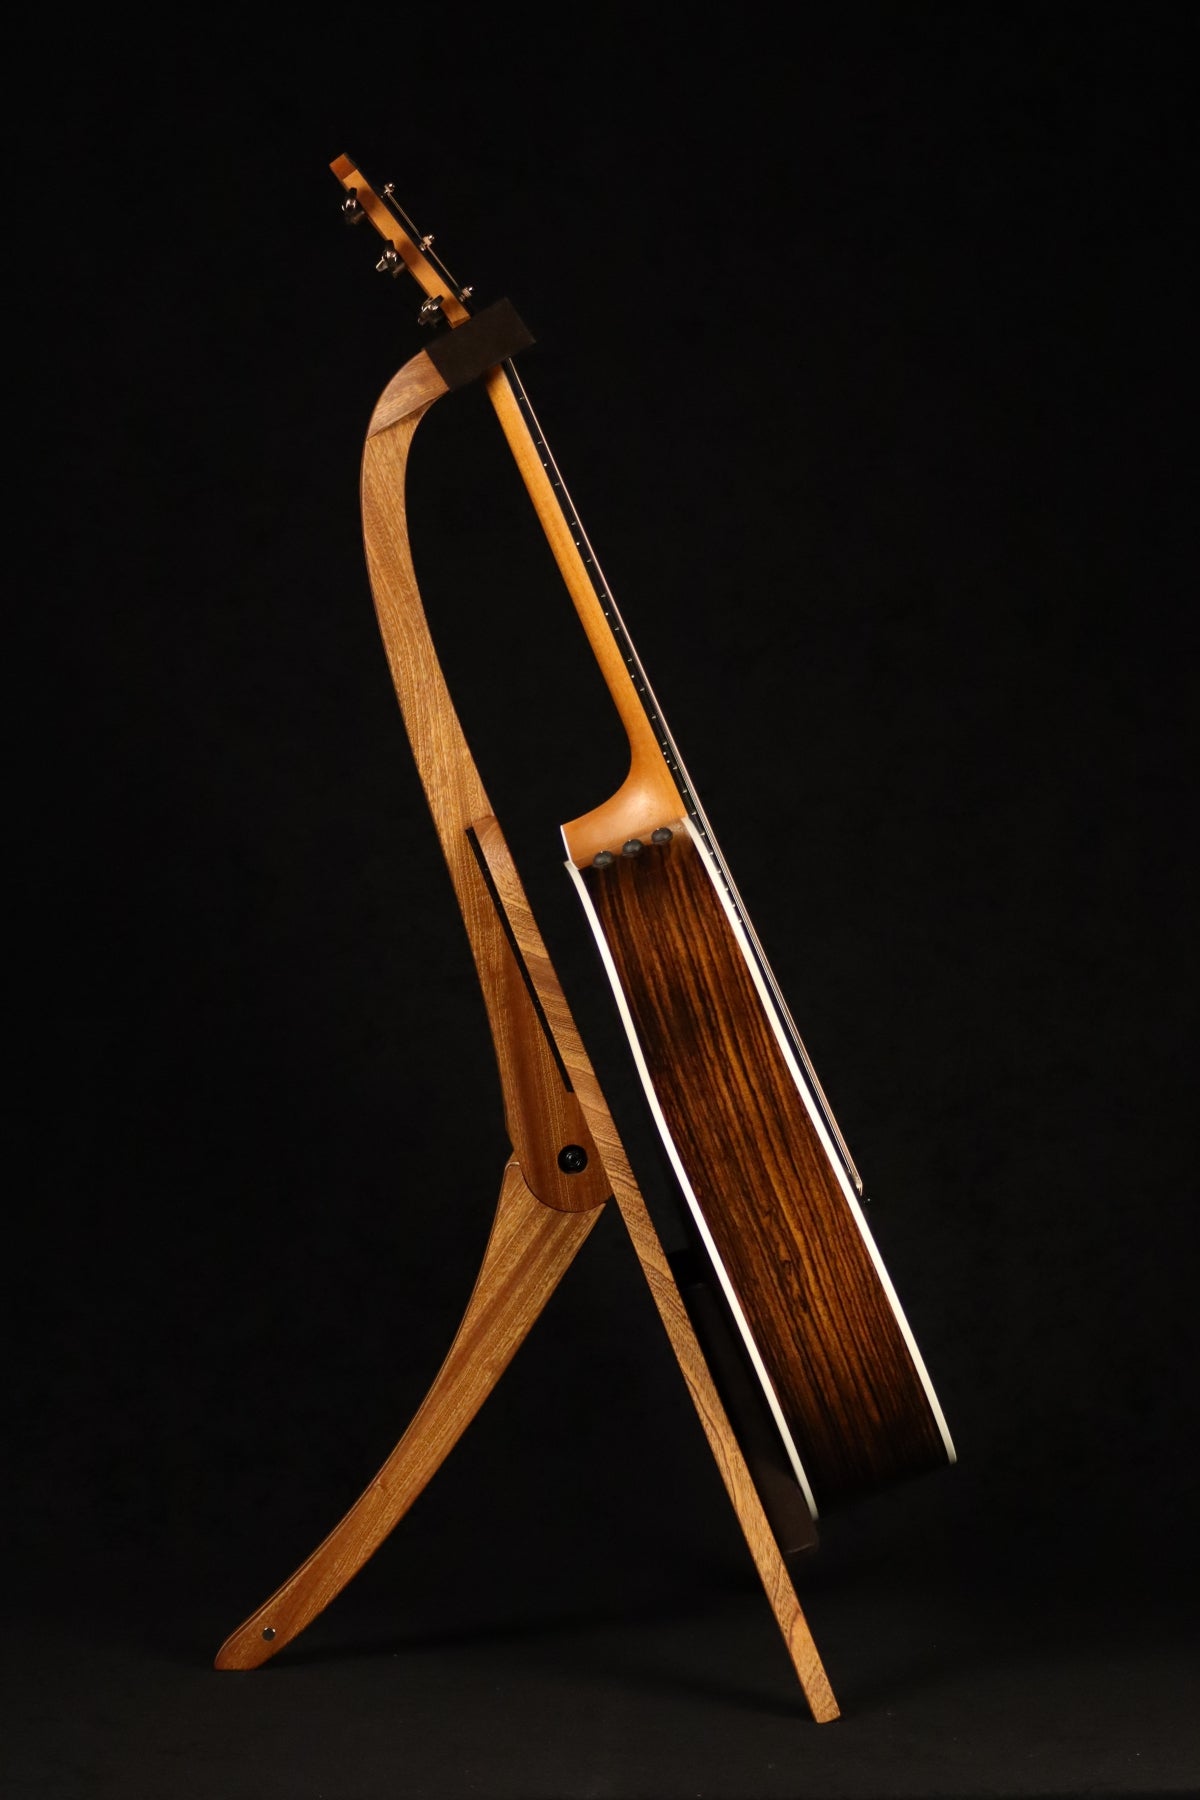 Folding sapele mahogany and curly maple wood guitar floor stand full side image with Taylor guitar